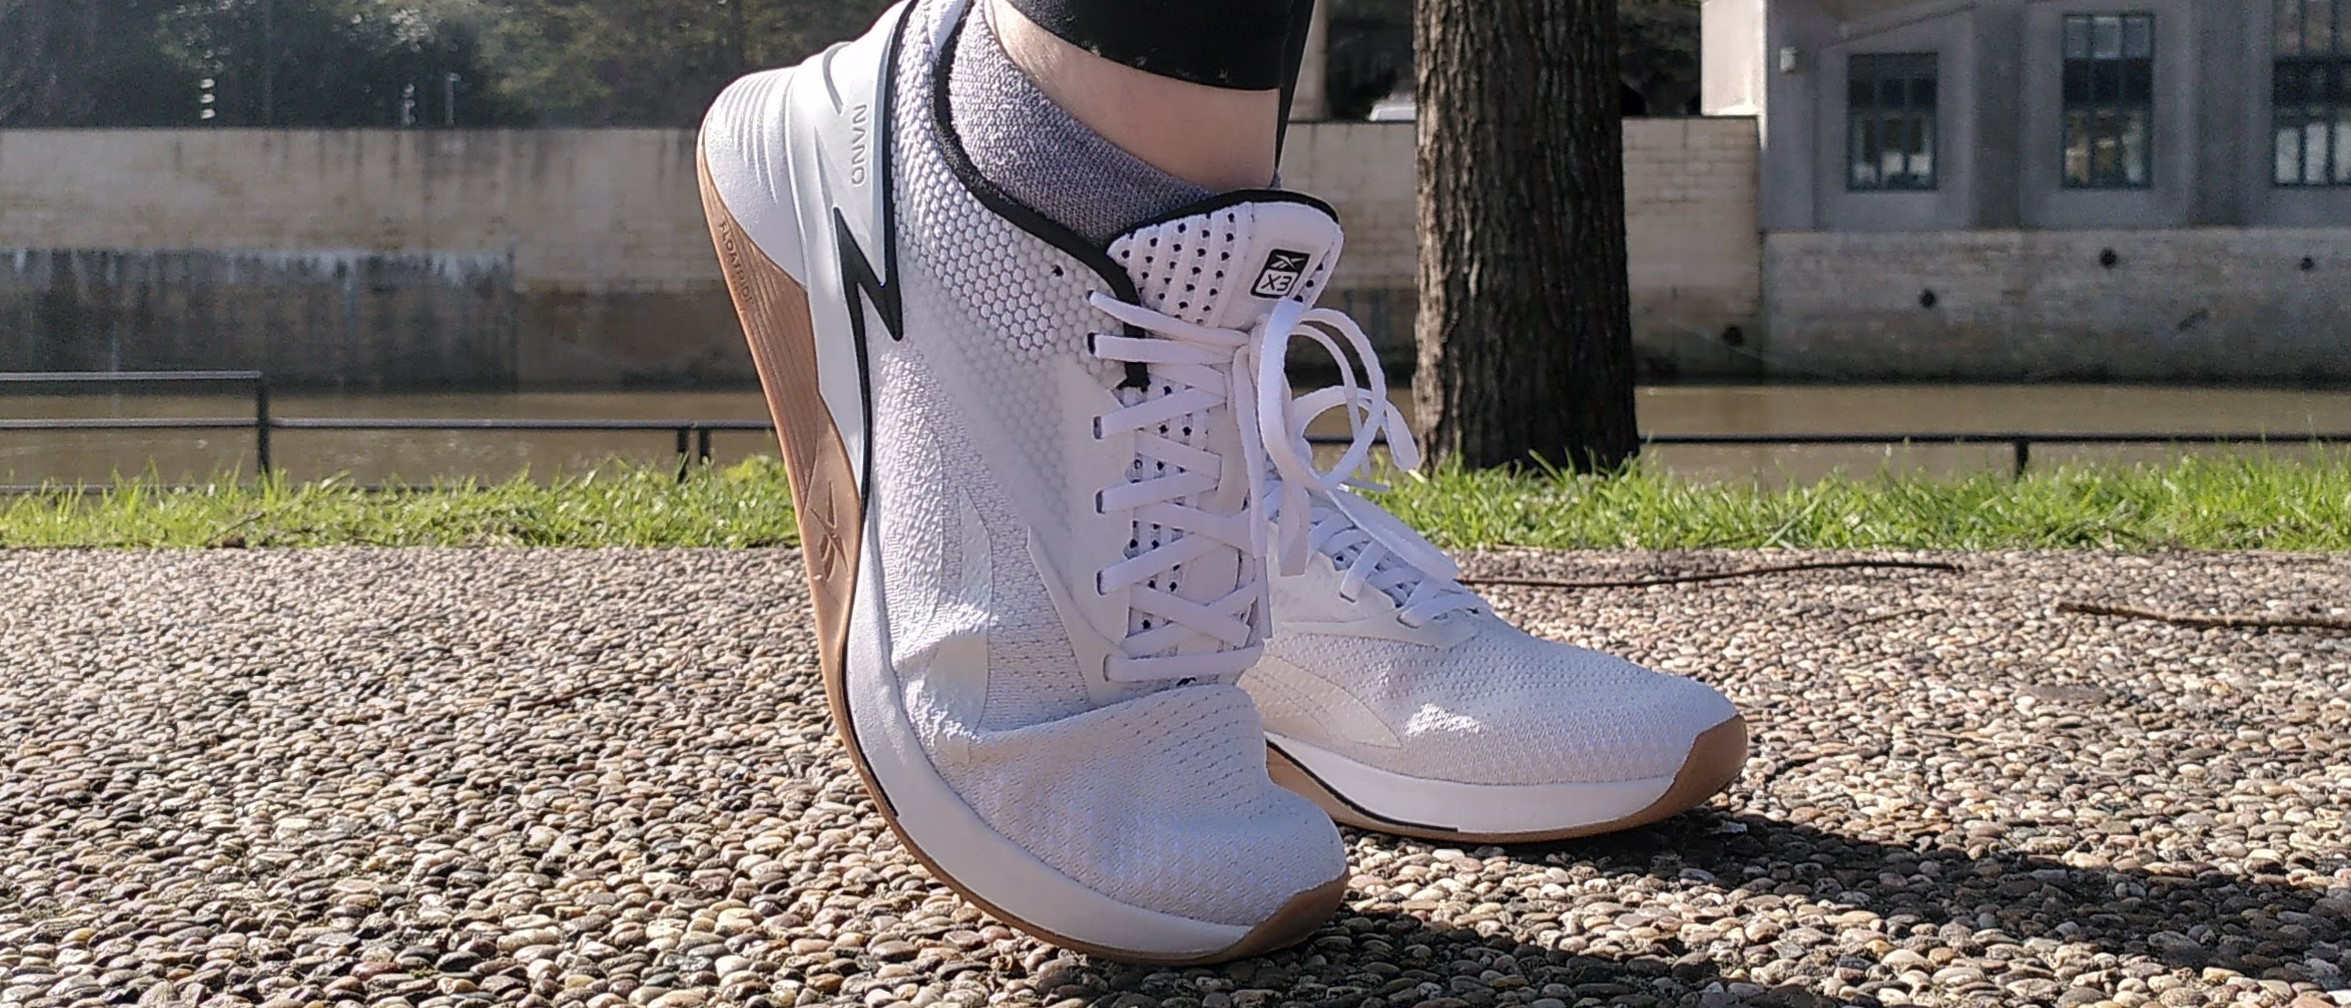 Reebok Nano X3 review: a supremely versatile fitness shoe indoors and